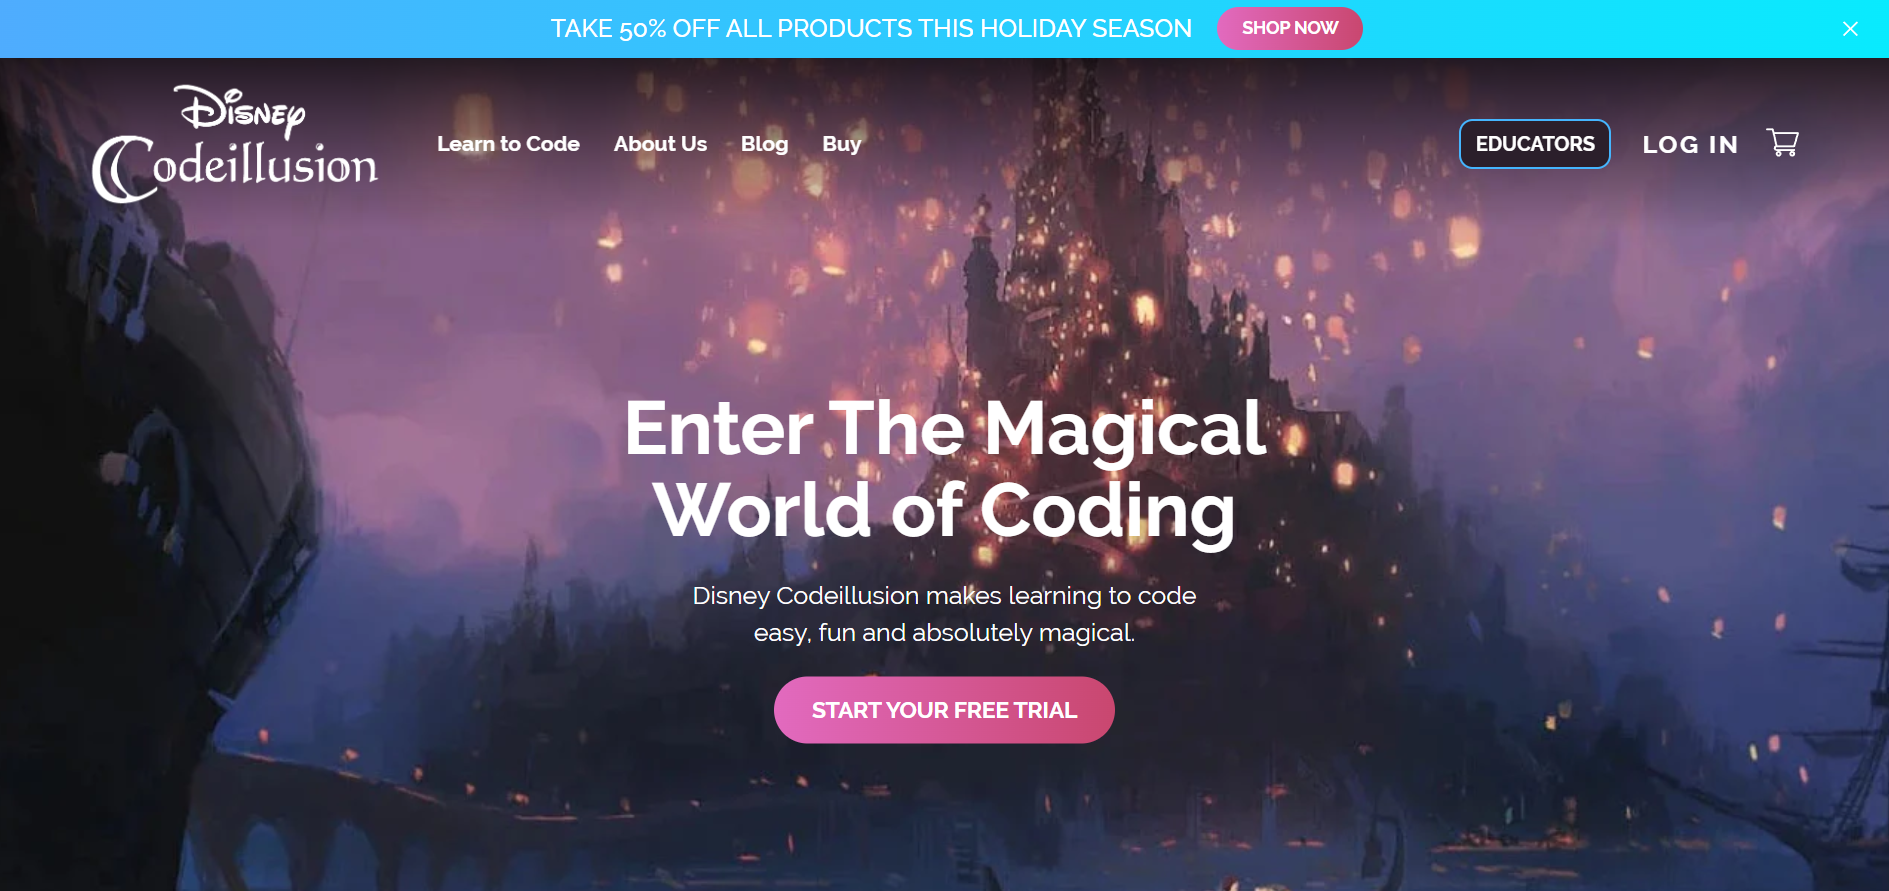 Enter The Magical World of Coding